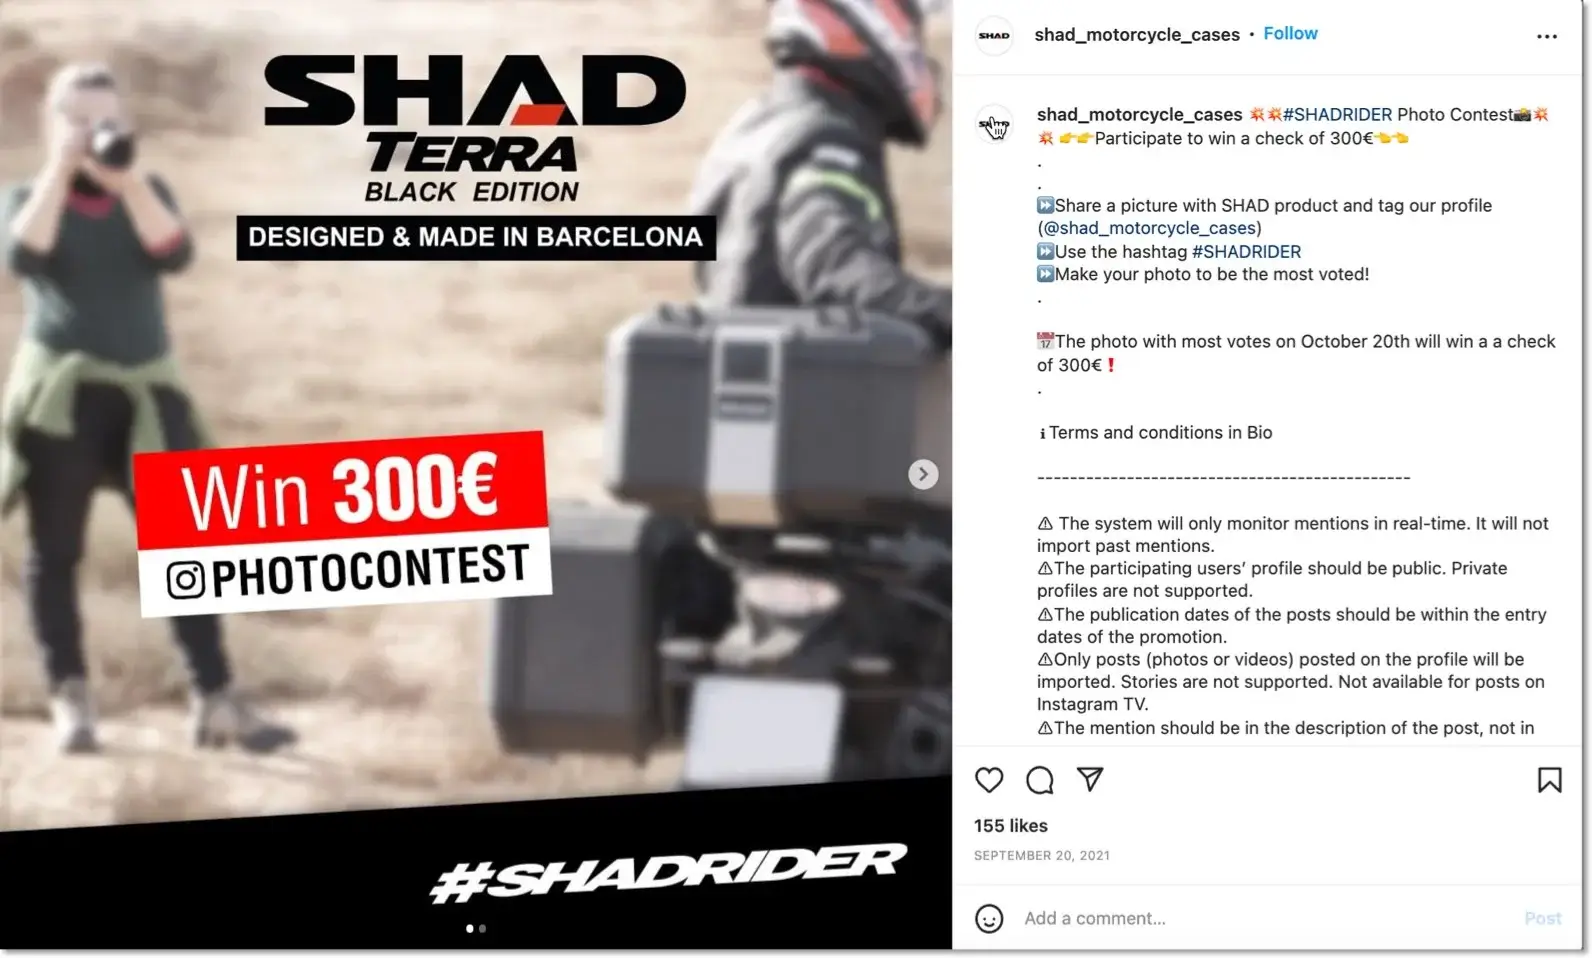 example of an instagram hashtag contest organized by Shad to collect UGC